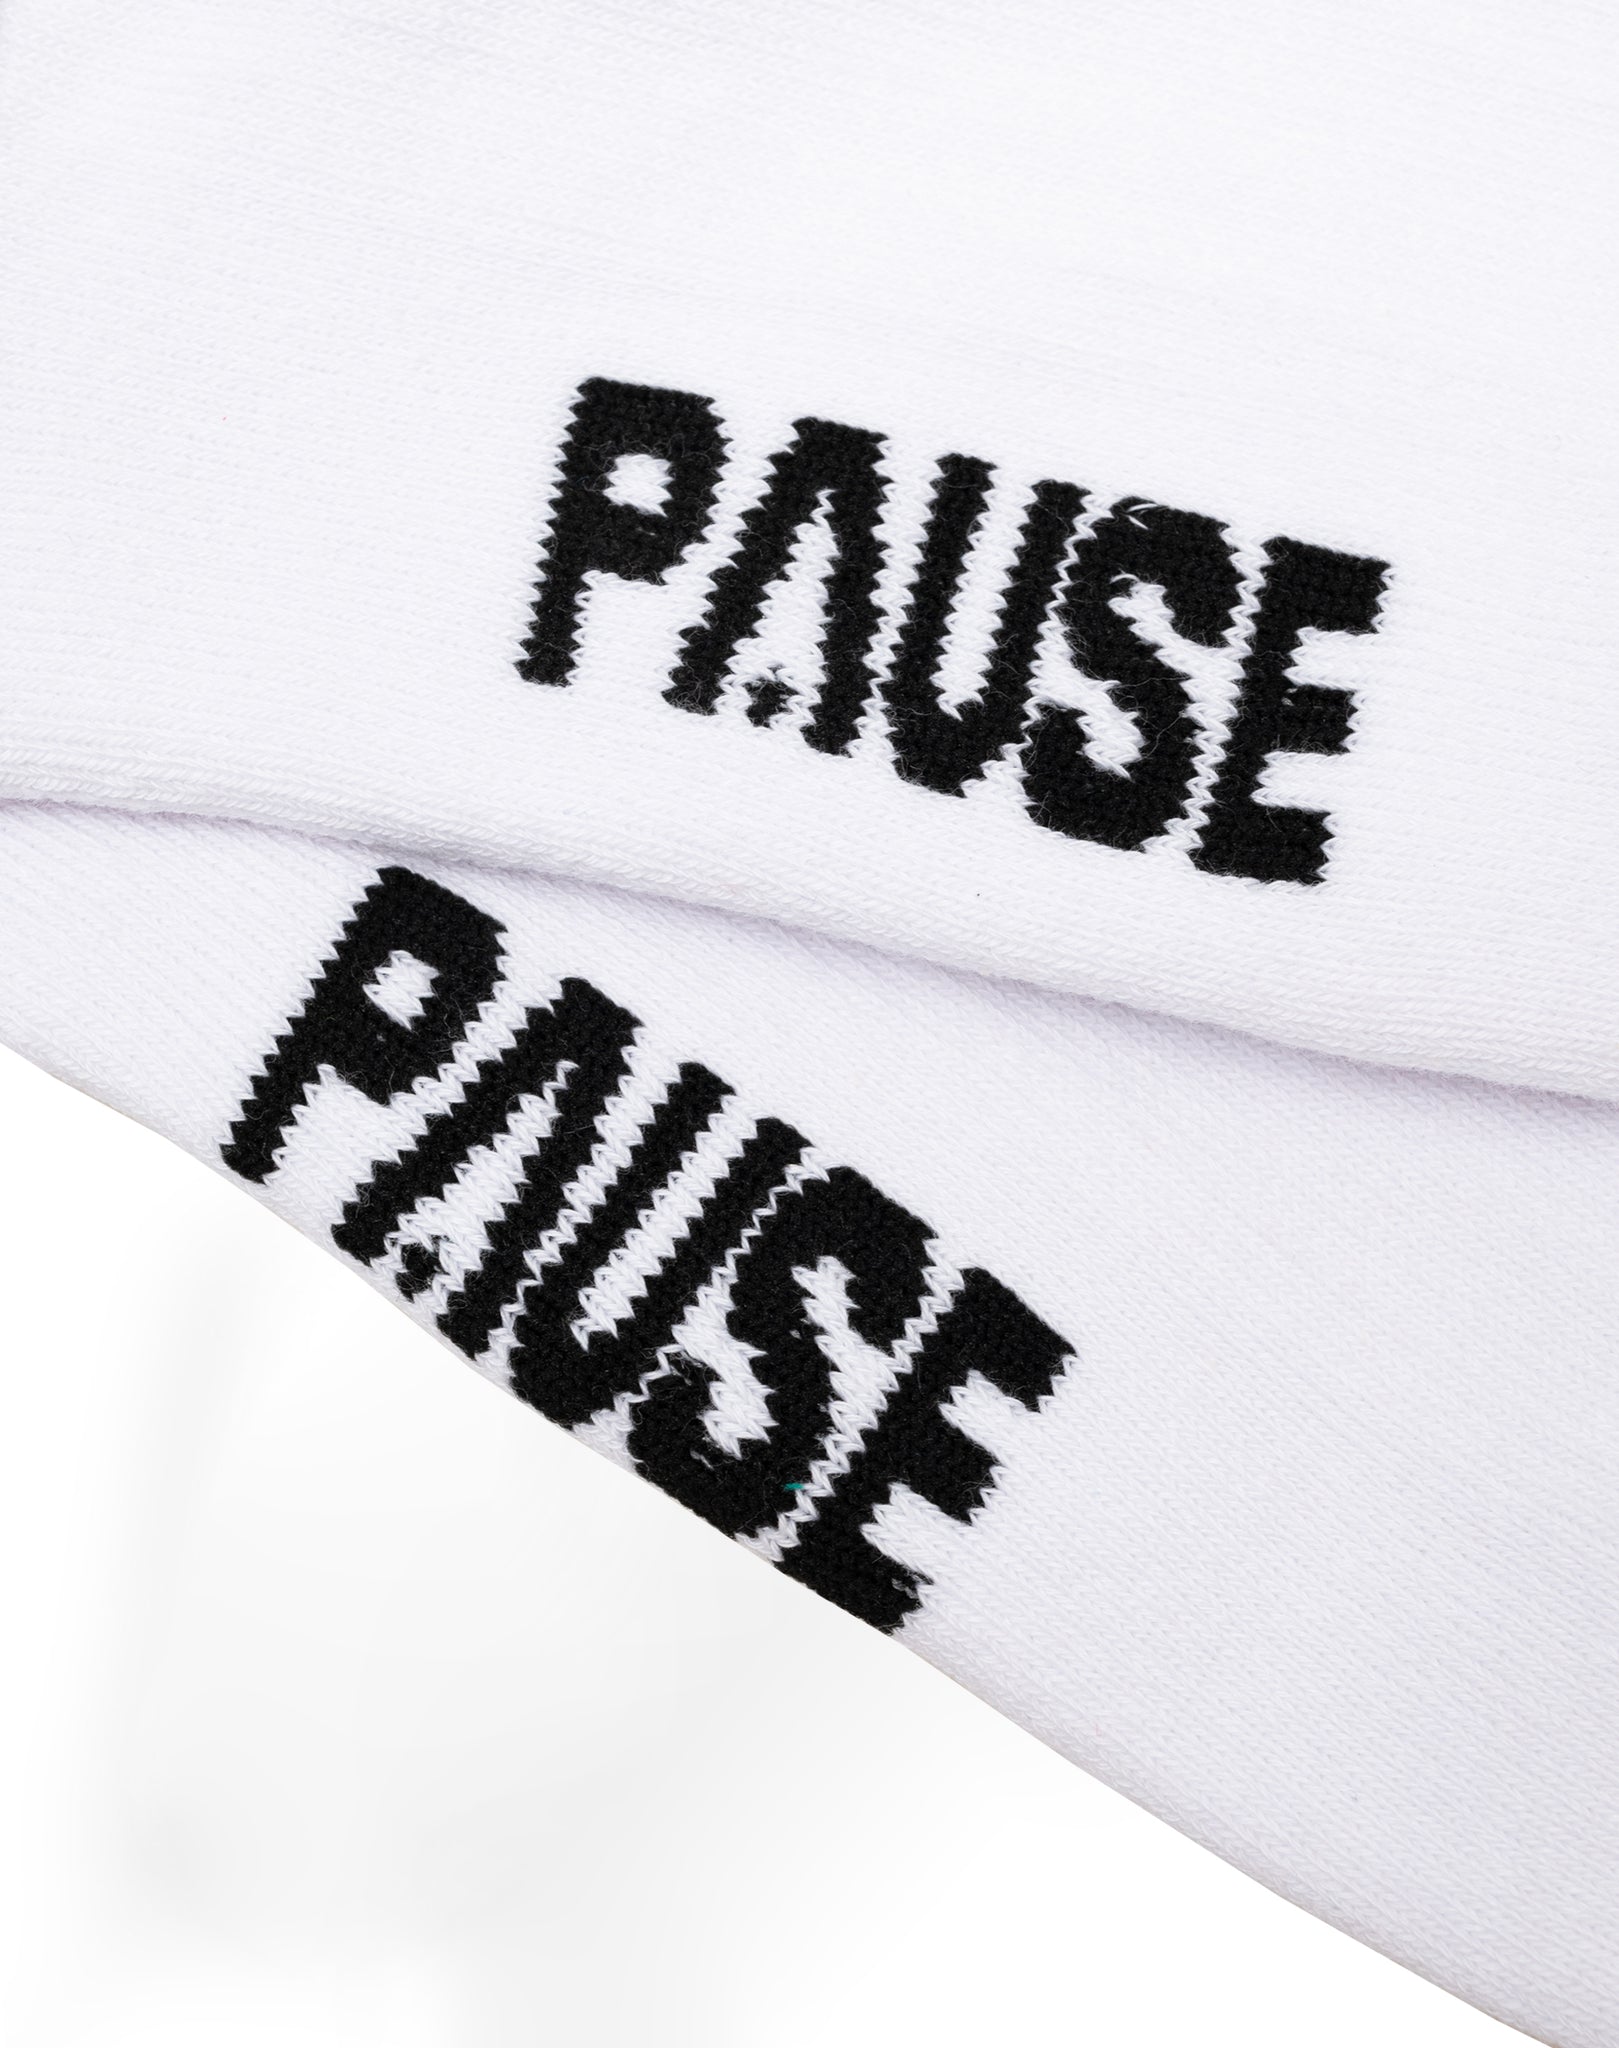 PAUSE 'Stay Homme' Socks